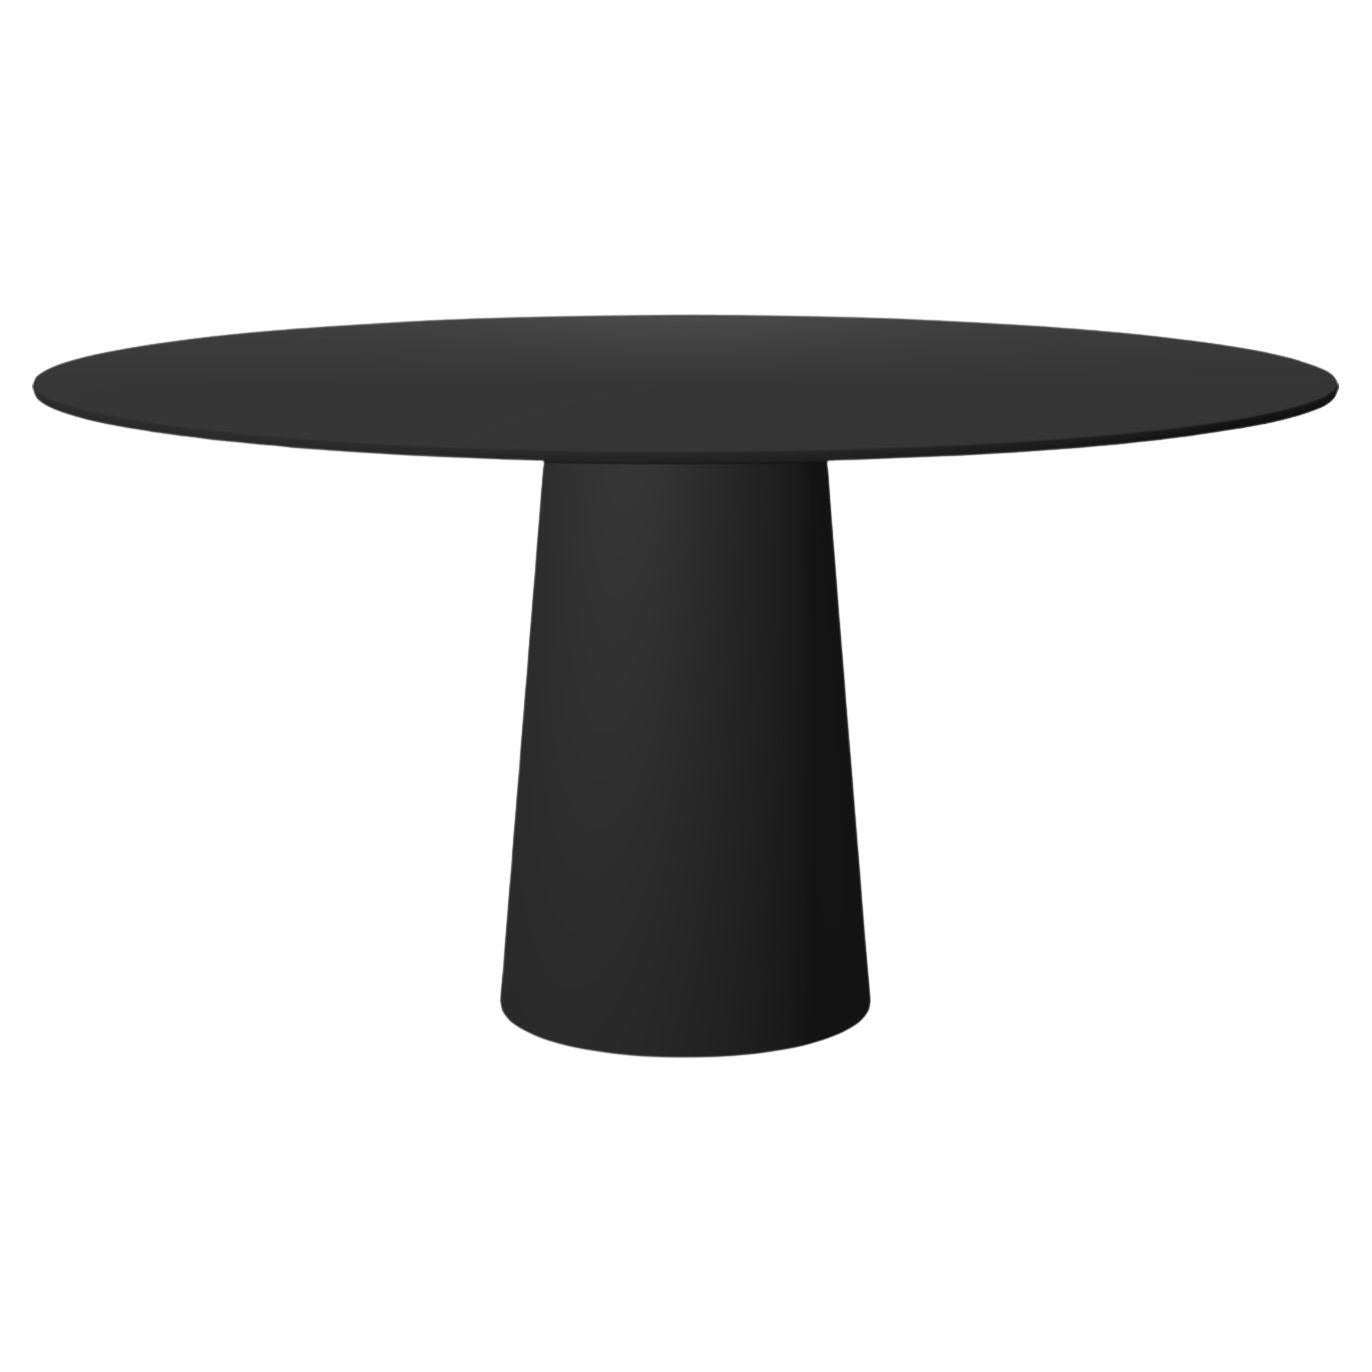 Moooi Container 120 Dining Table in Black Base & Oak Top, Marcel Wanders Studio For Sale